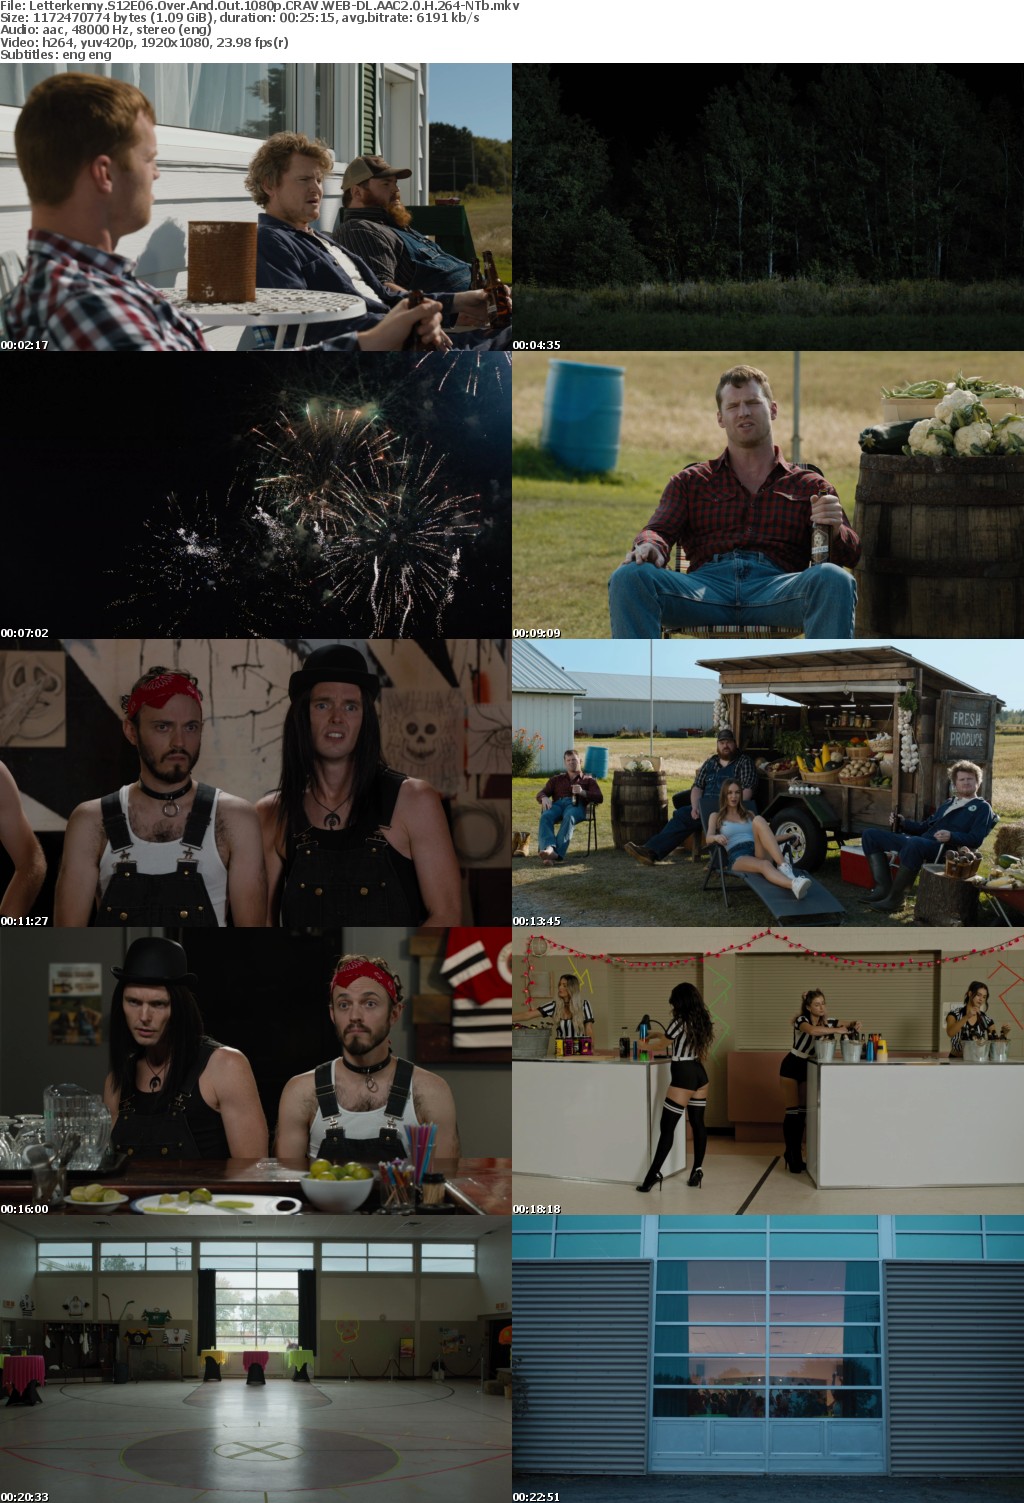 Letterkenny S12E06 Over And Out 1080p CRAV WEB-DL AAC2 0 H 264-NTb